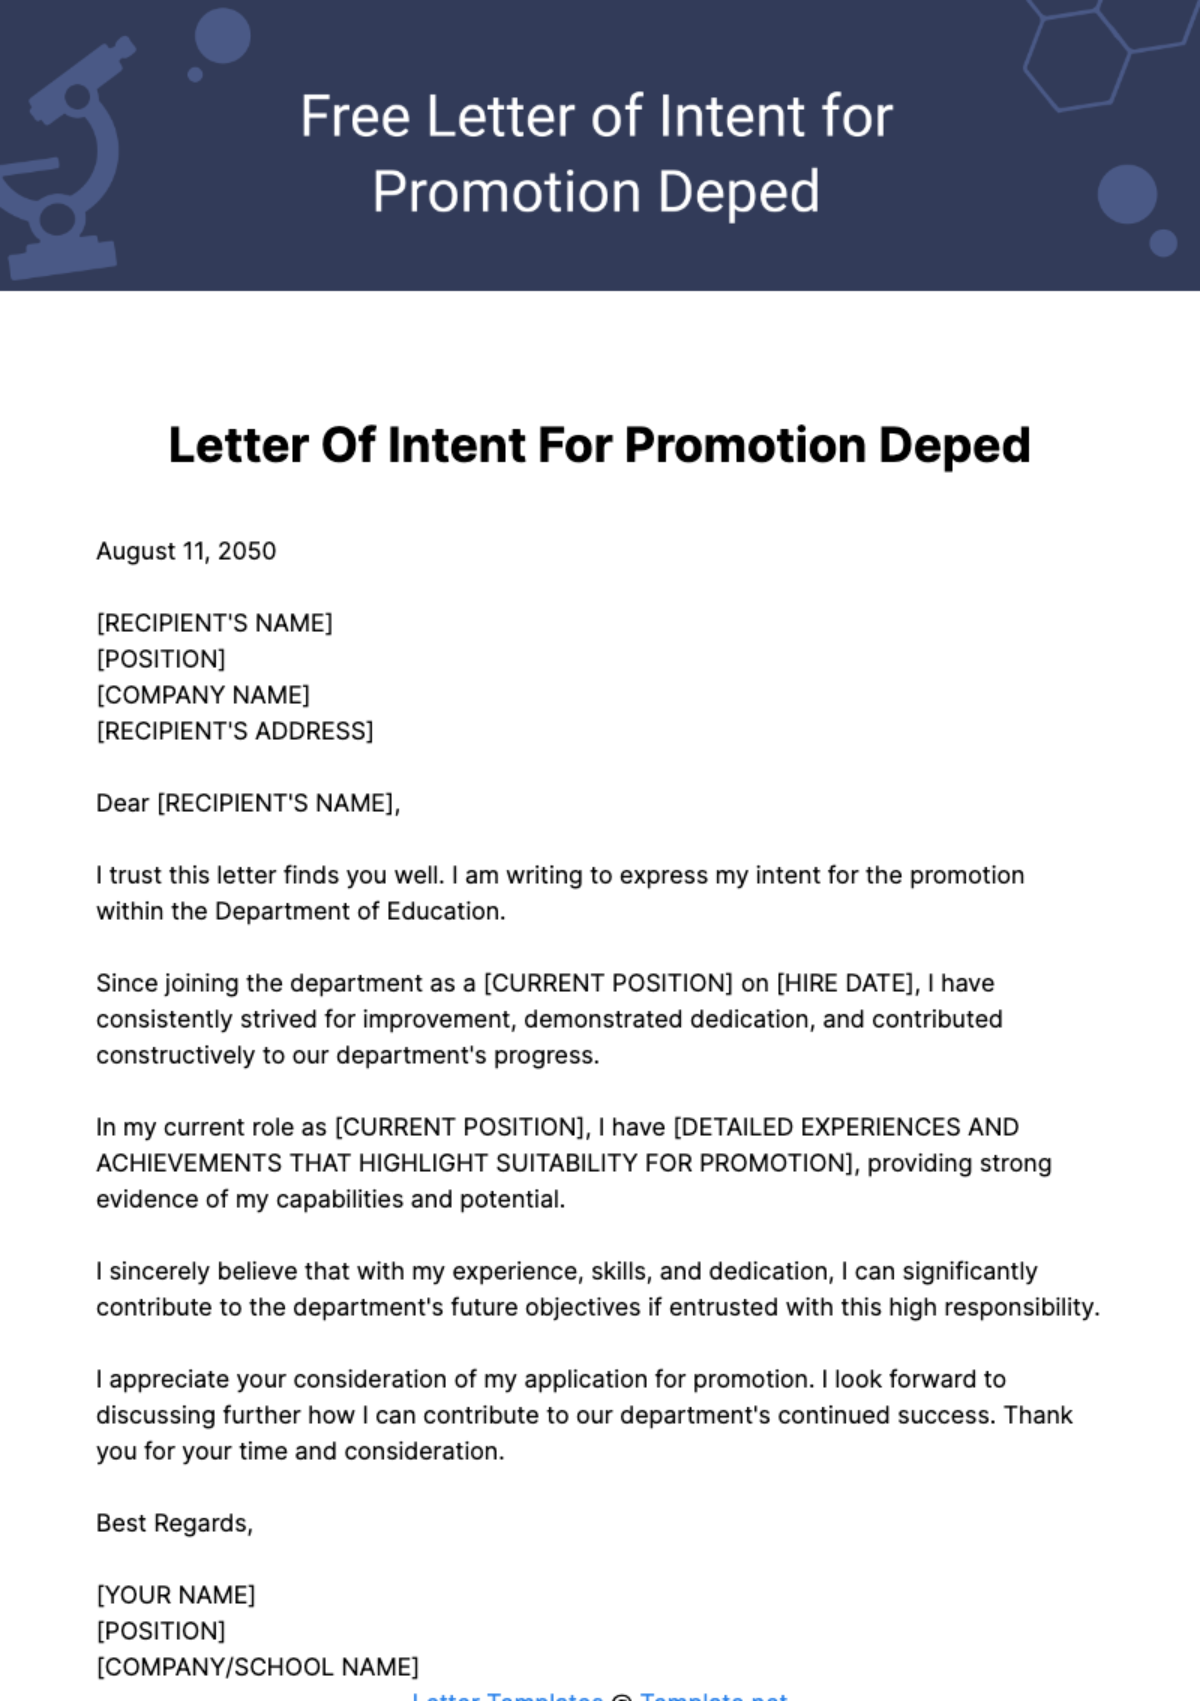 Free Letter of Intent for Promotion Deped Template